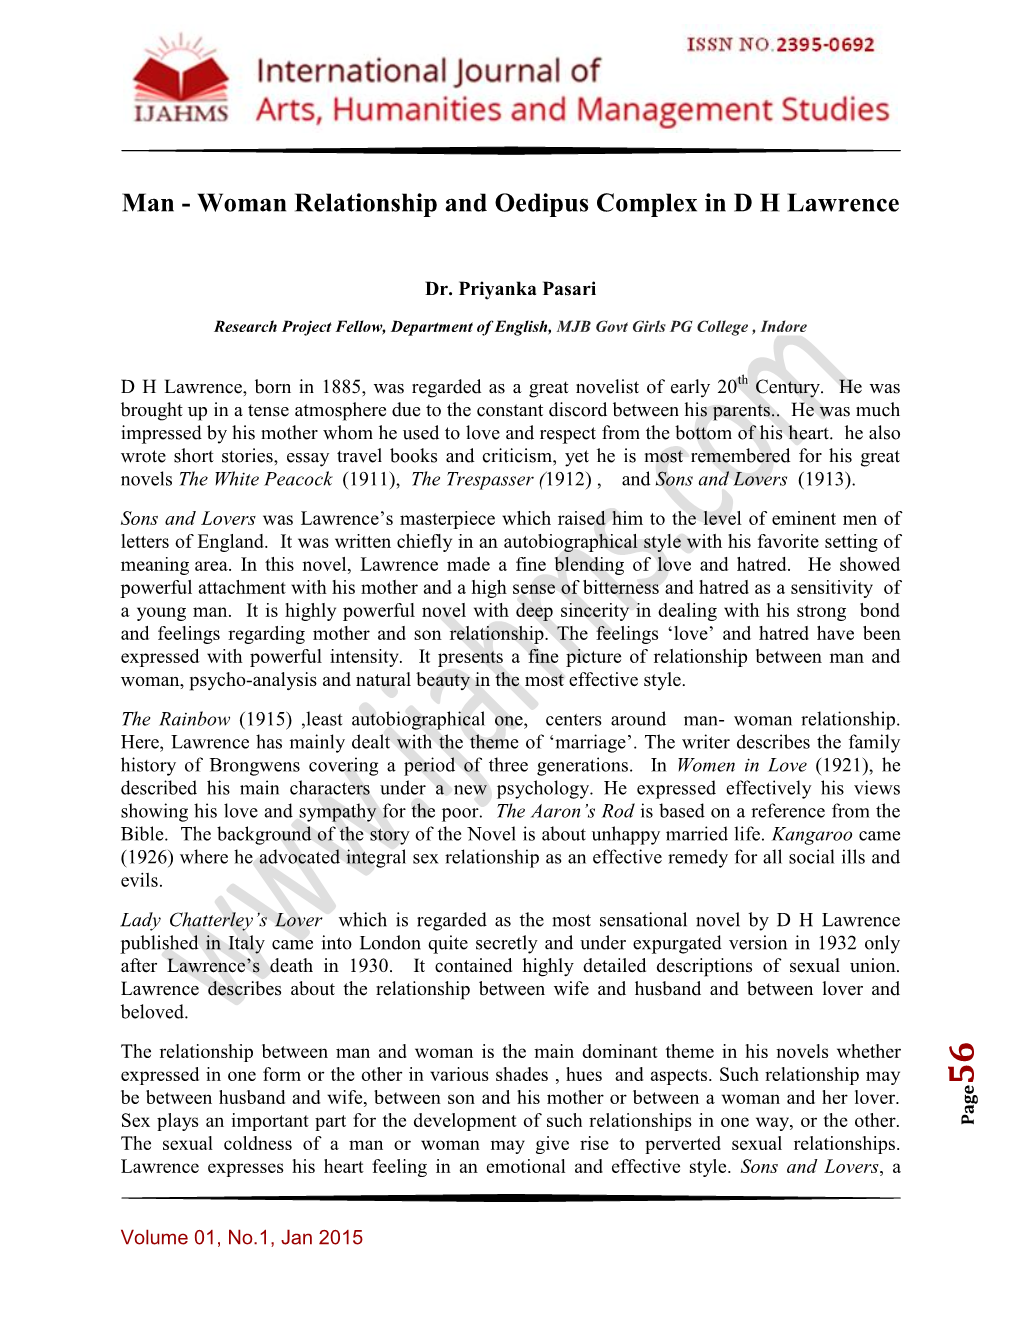 Man - Woman Relationship and Oedipus Complex in D H Lawrence